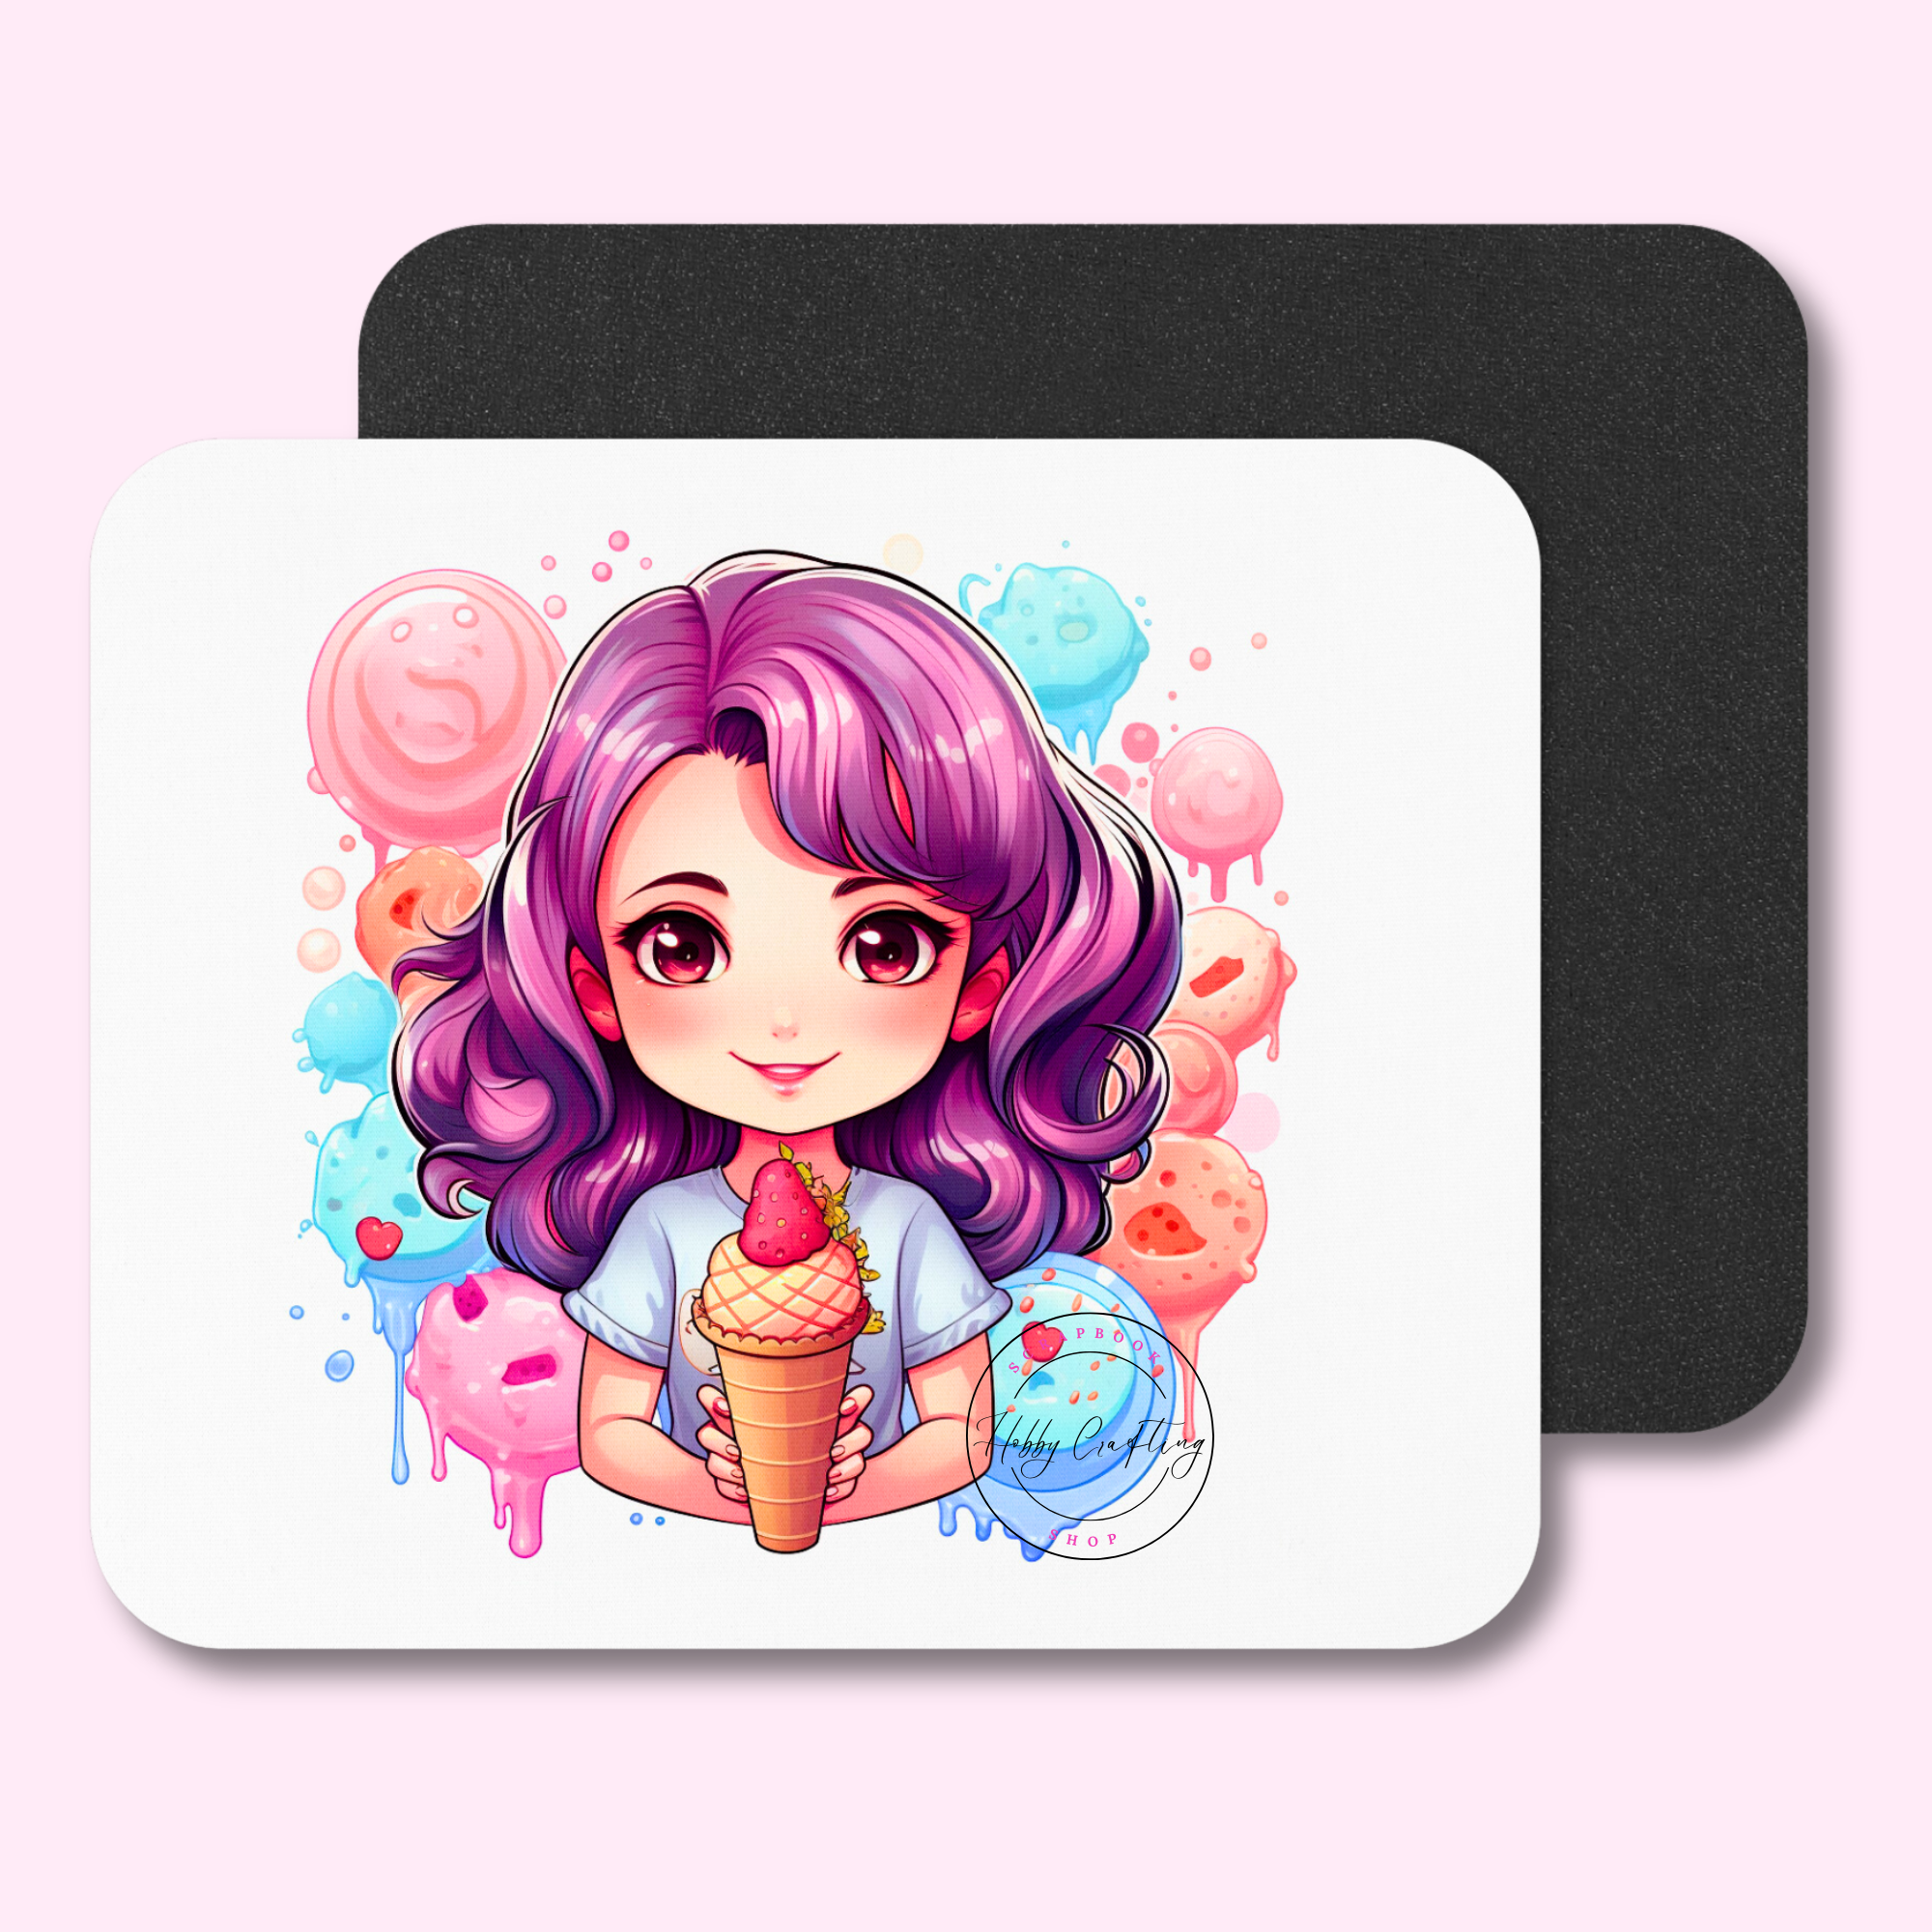 Sublimated Mouse Pad Girl Ice Crean Cone